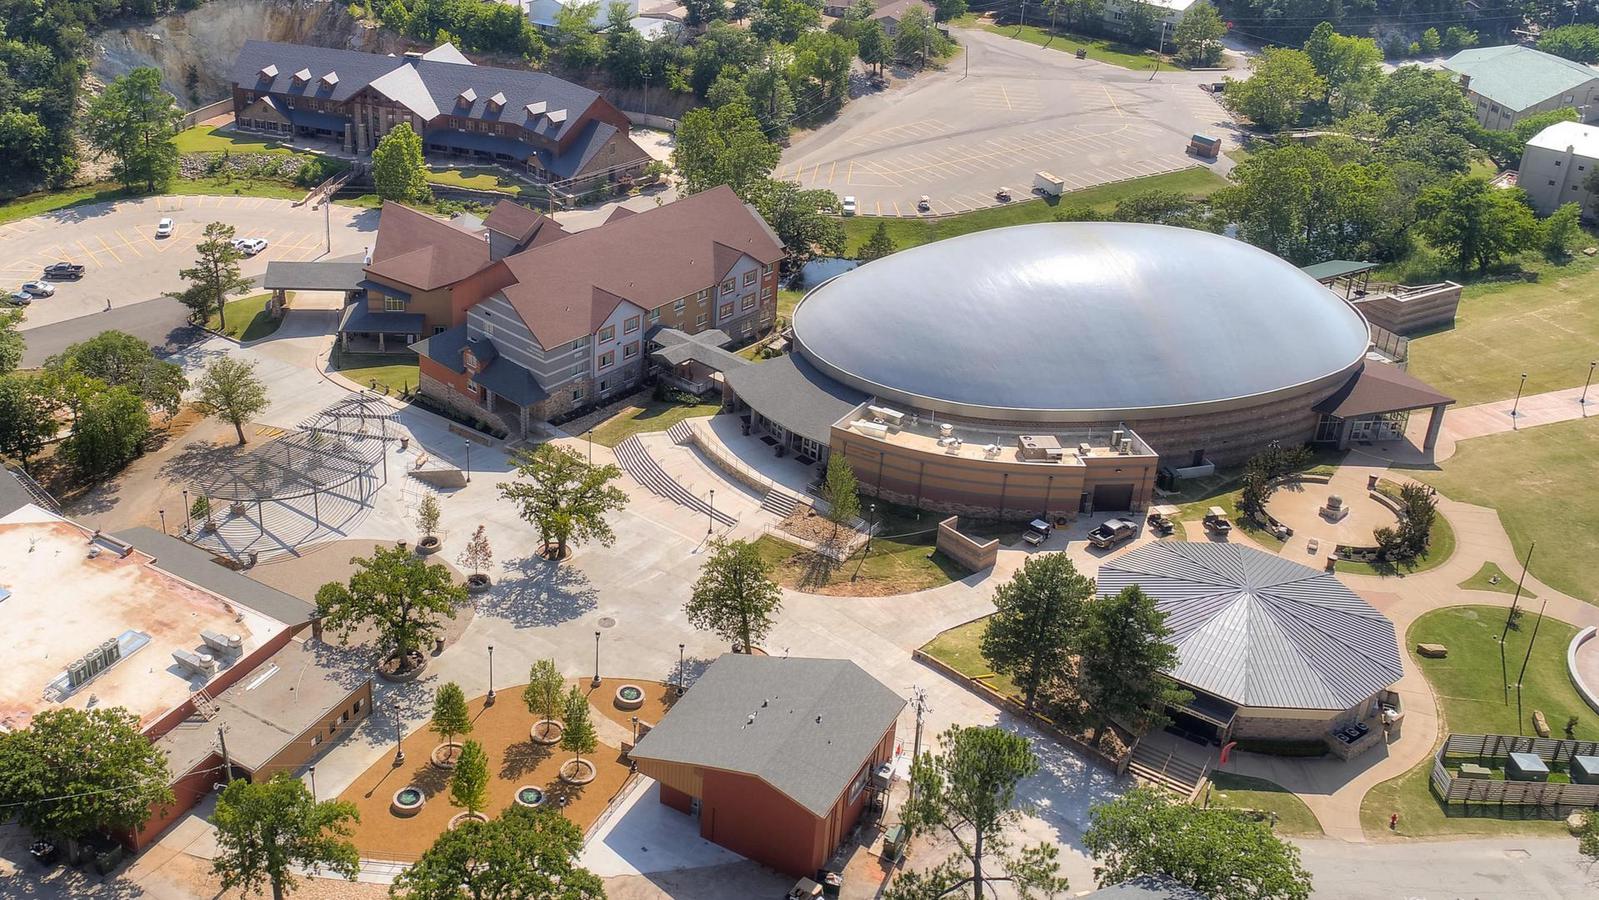 Aerial view of the Mathena Family Event Center.